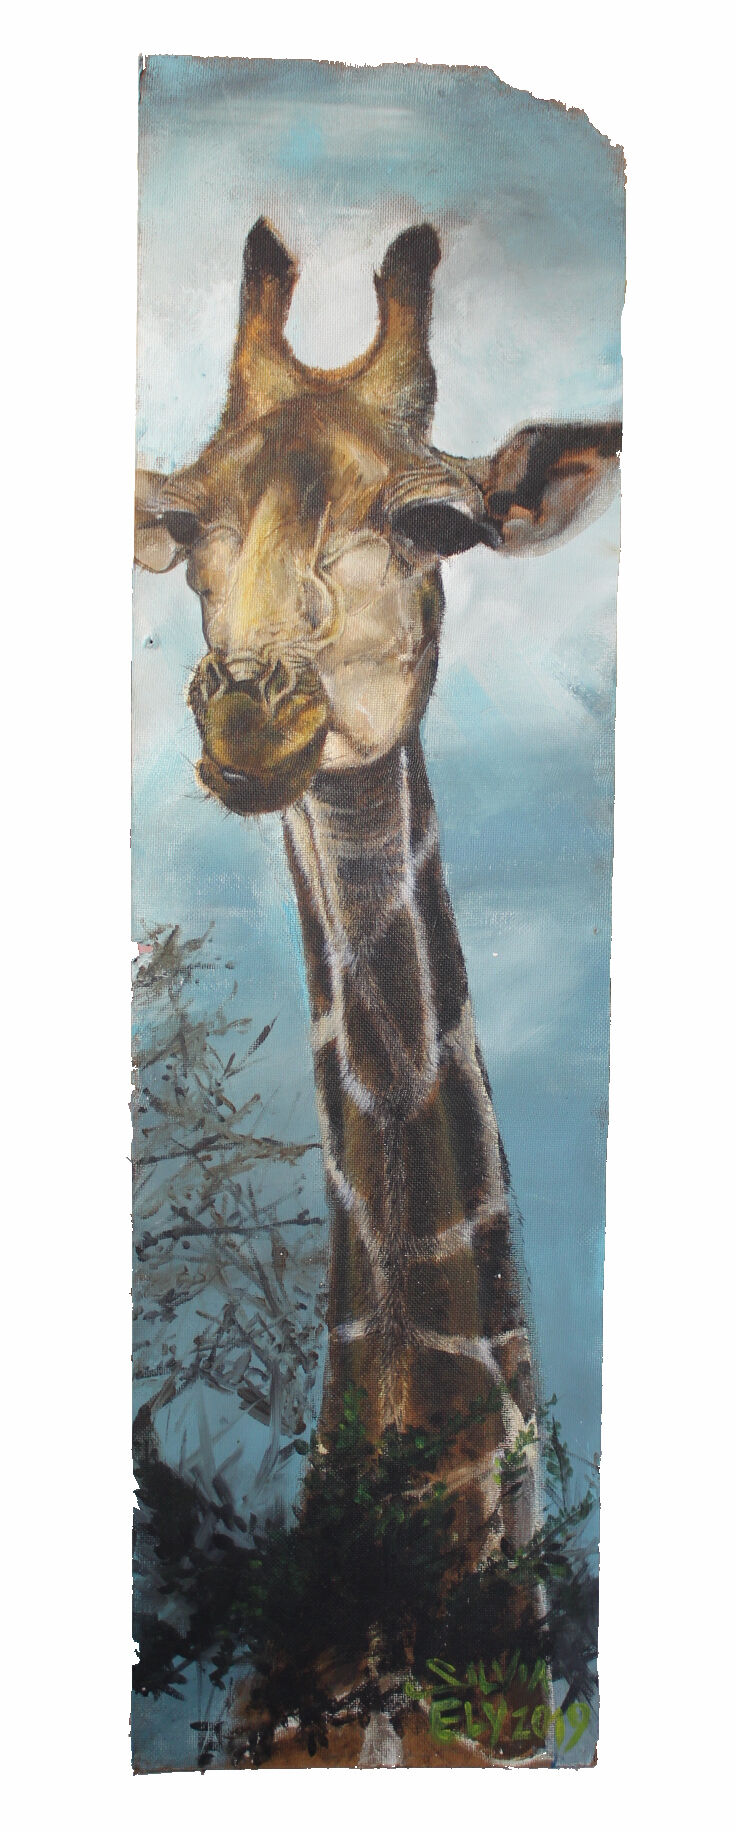 Giraffe - a Paint by Silviaely